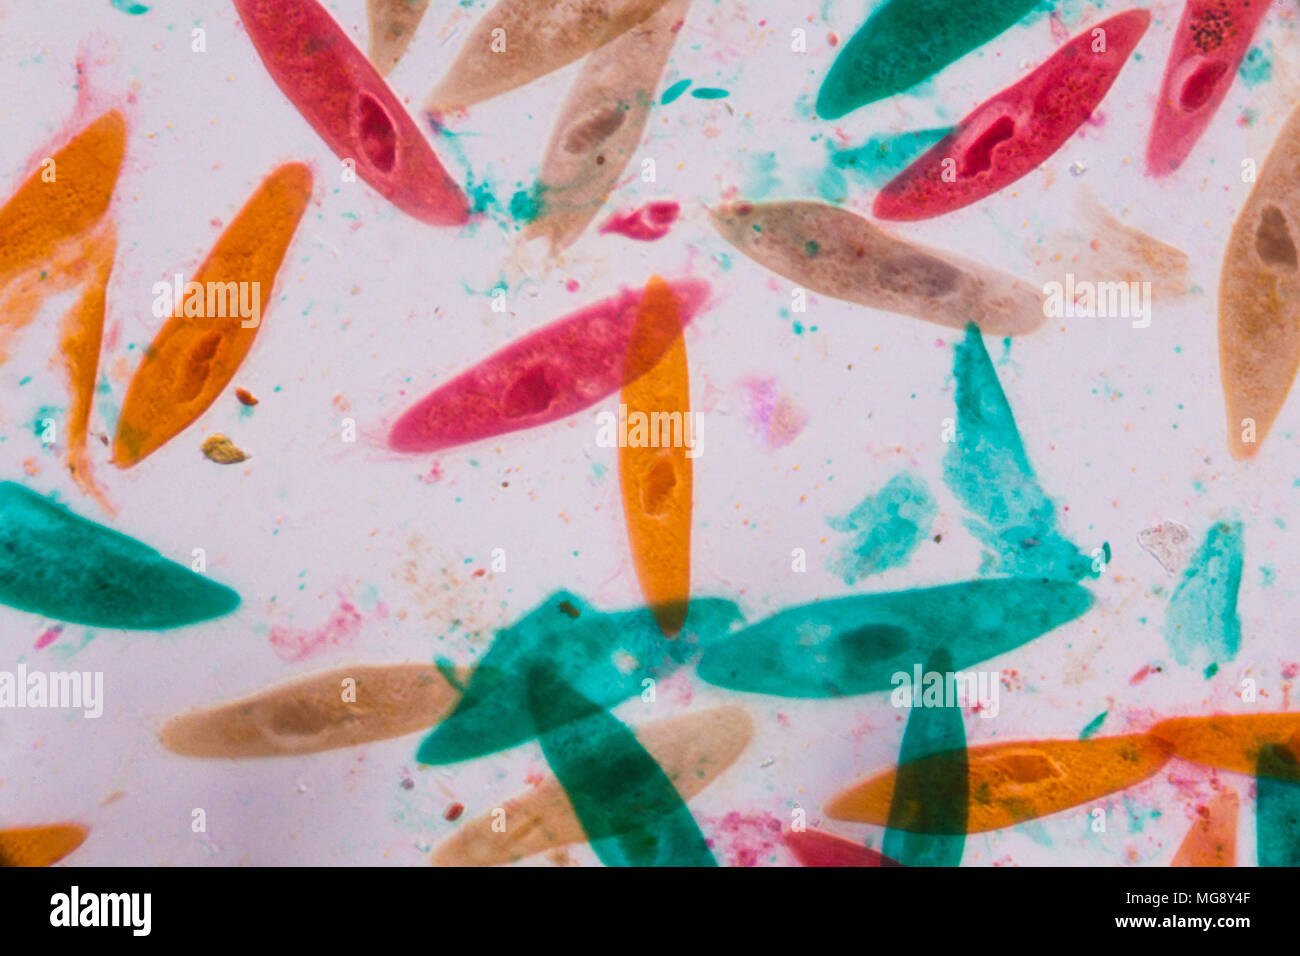 Paramecium caudatum under the microscope - Abstract shapes in color of green, red, orange and brown on white background. Stock Photo